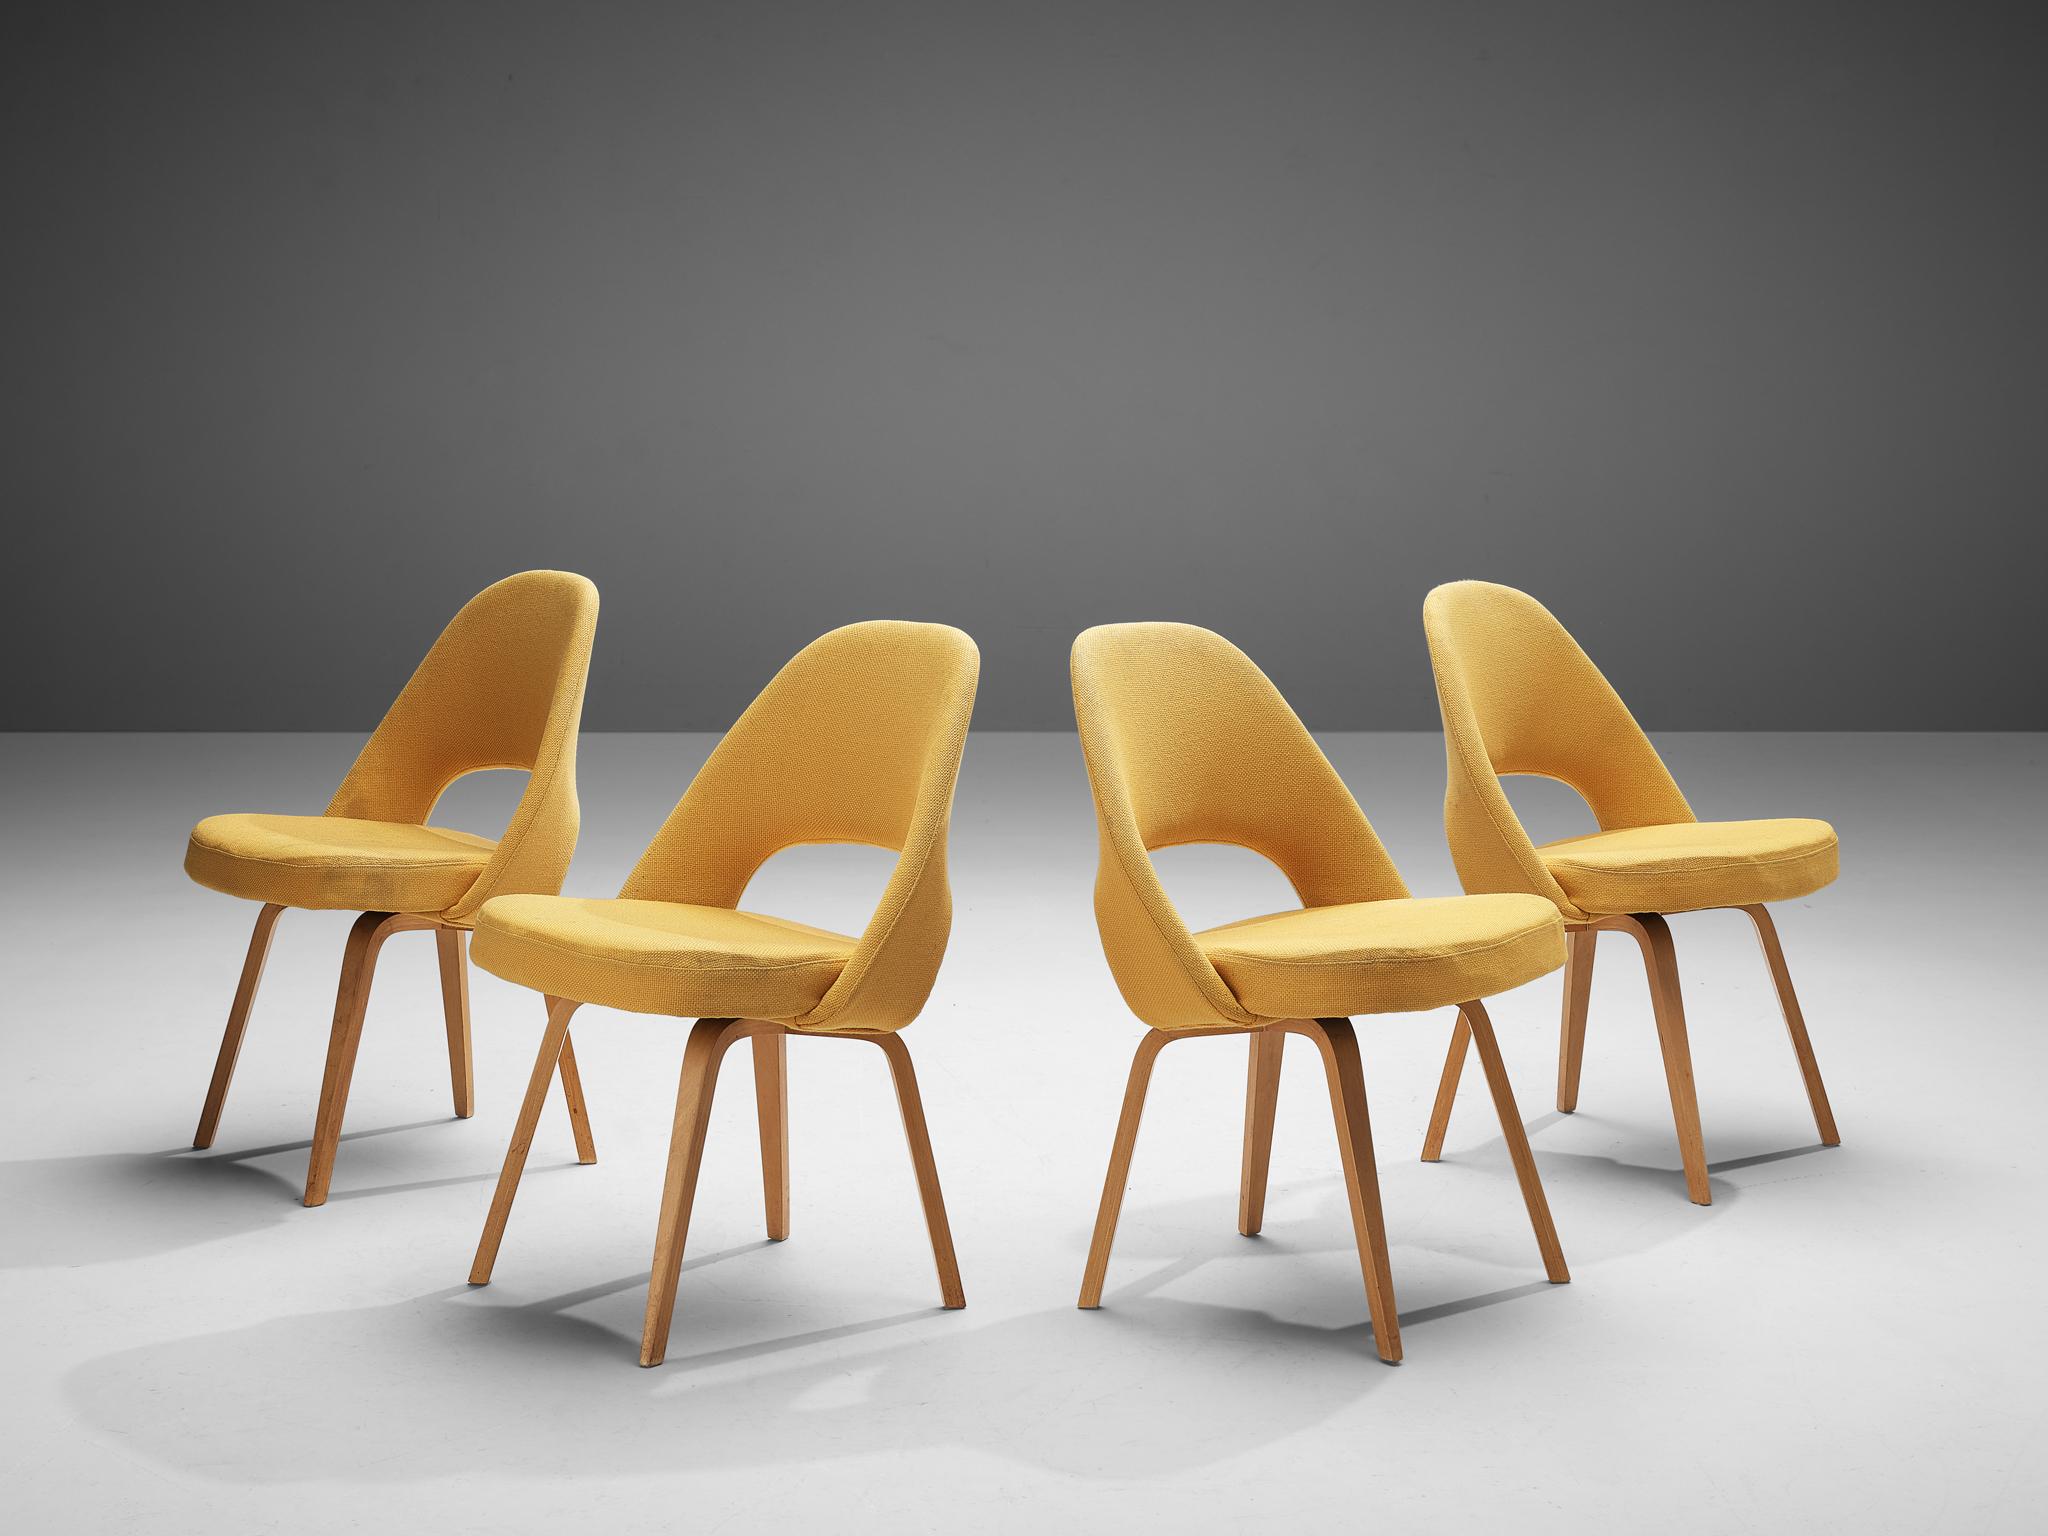 Eero Saarinen for Knoll International, set of four model 72 chairs, in wood and yellow fabric, United States 1948. 

Set of four organic shaped chairs designed by Eero Saarinen. A fluid, sculptural form. This timeless and versatile design